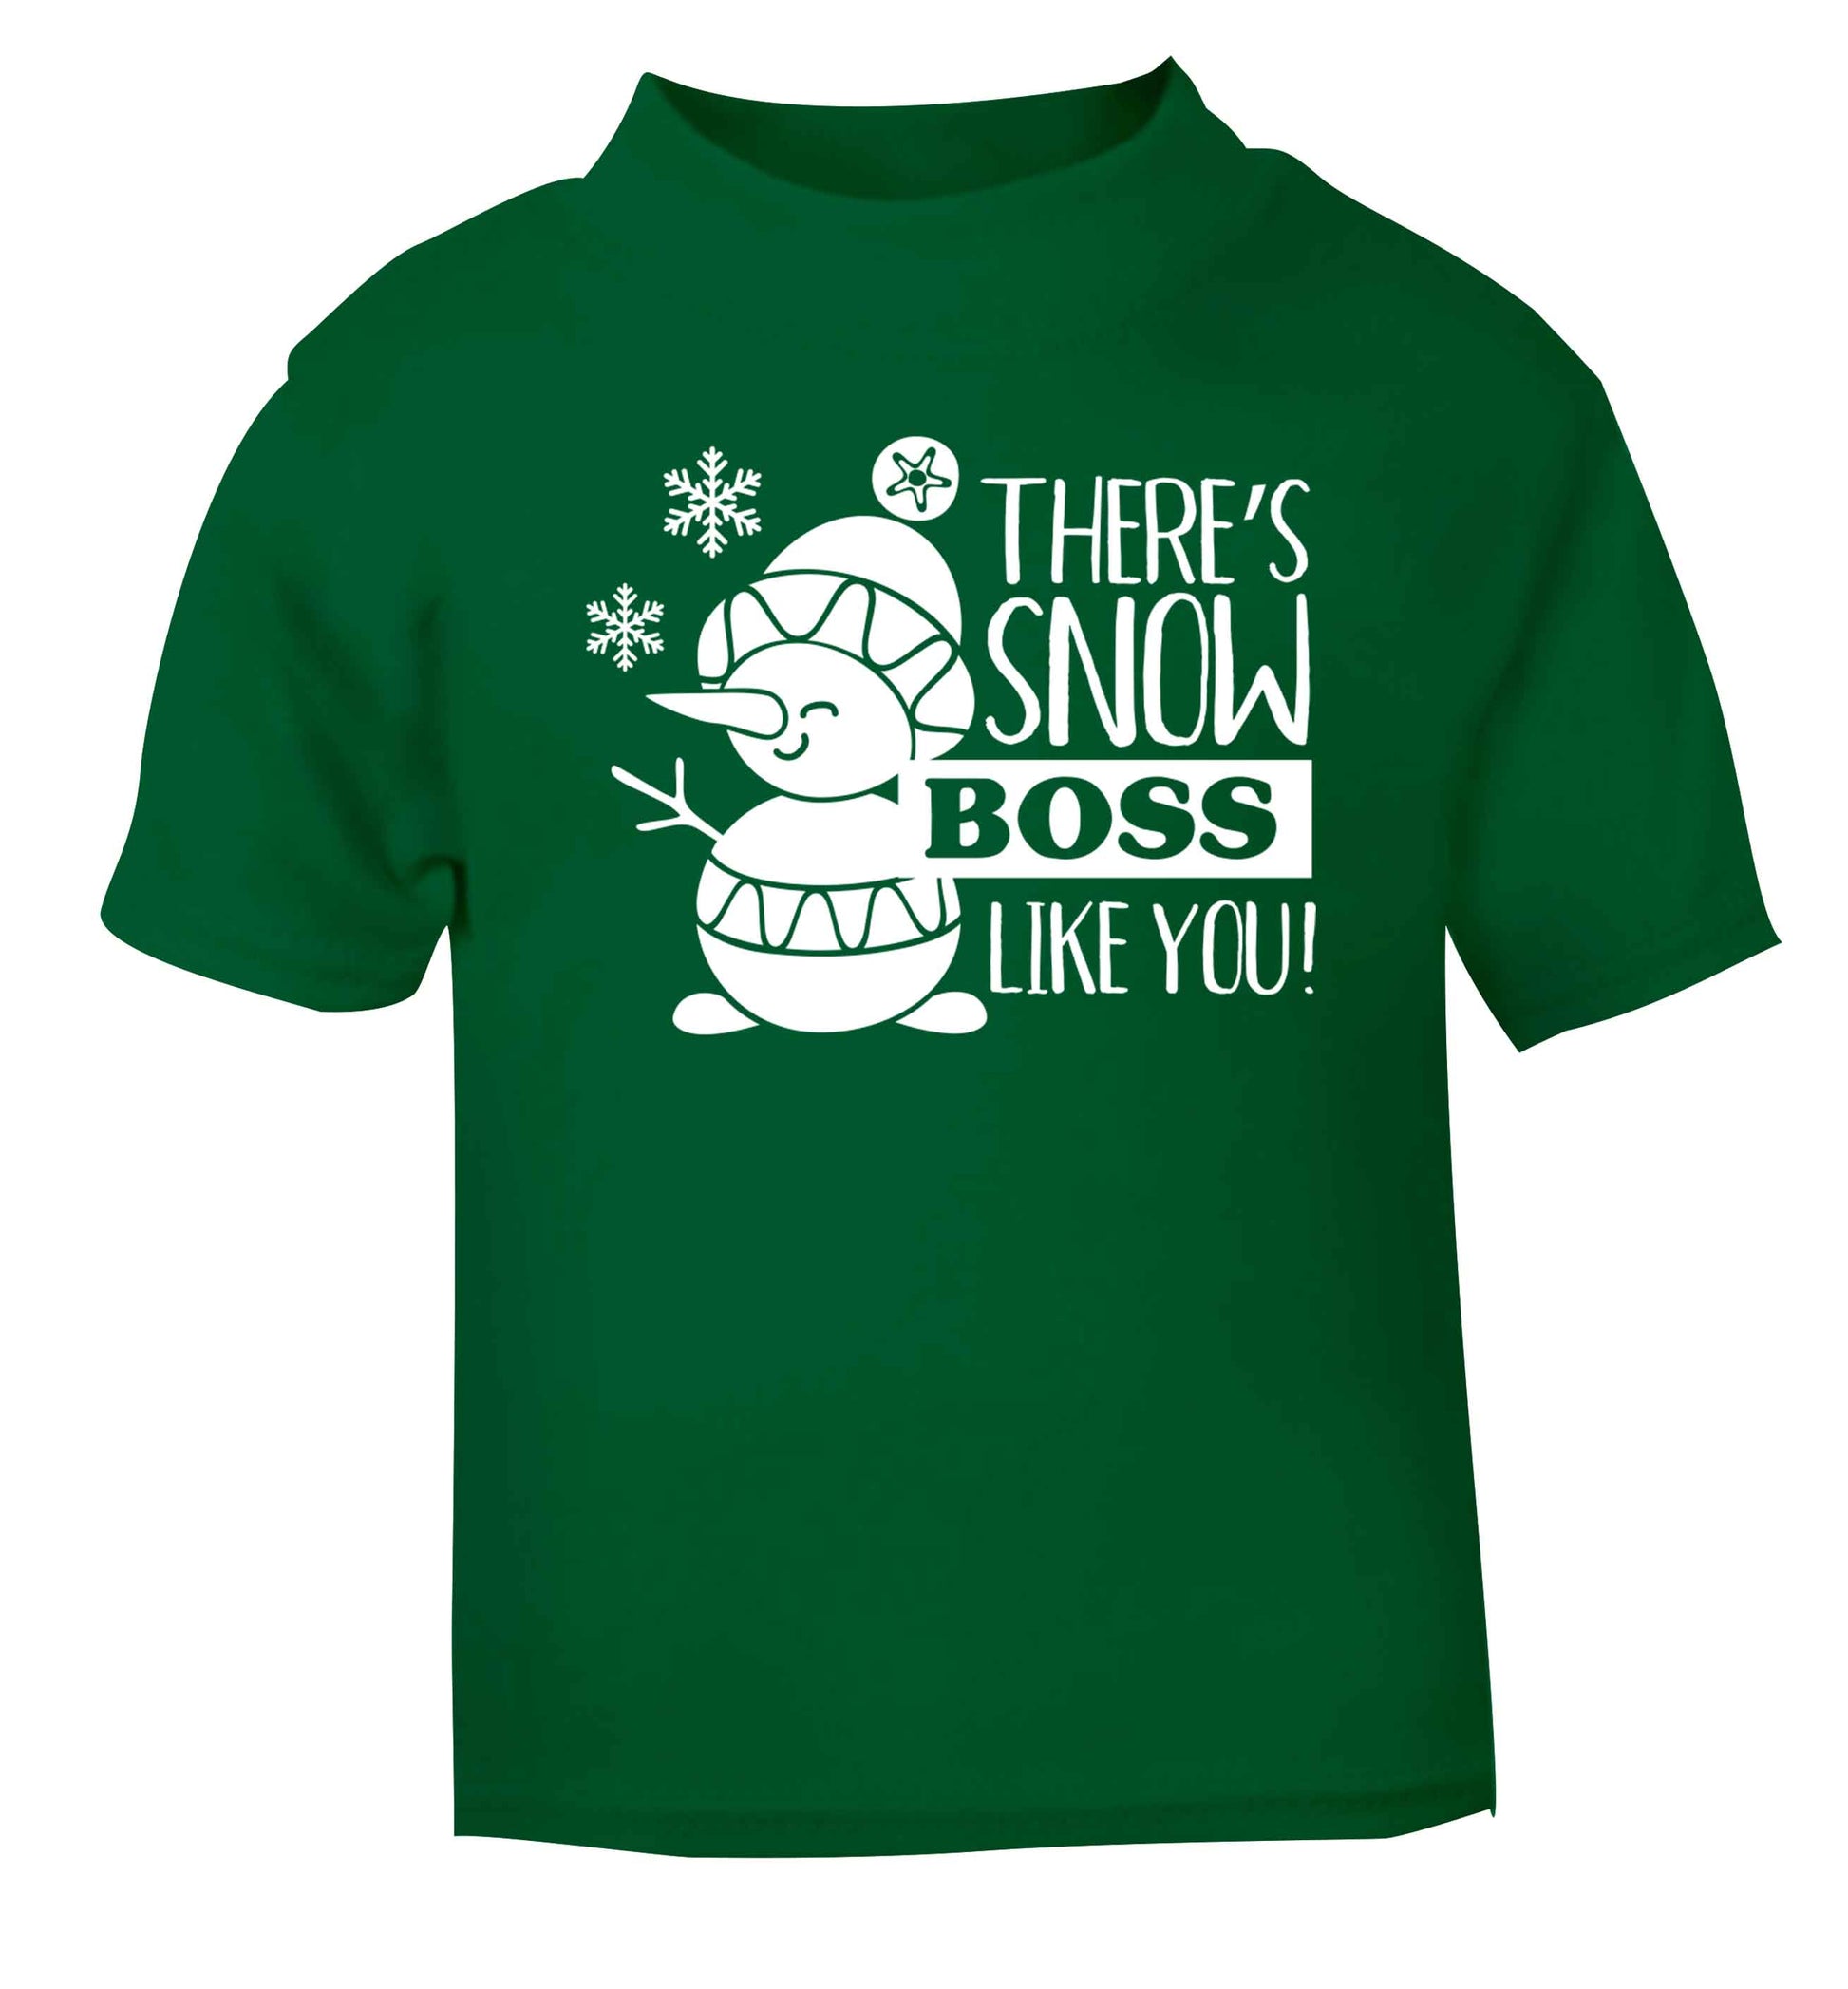 There's snow boss like you green baby toddler Tshirt 2 Years